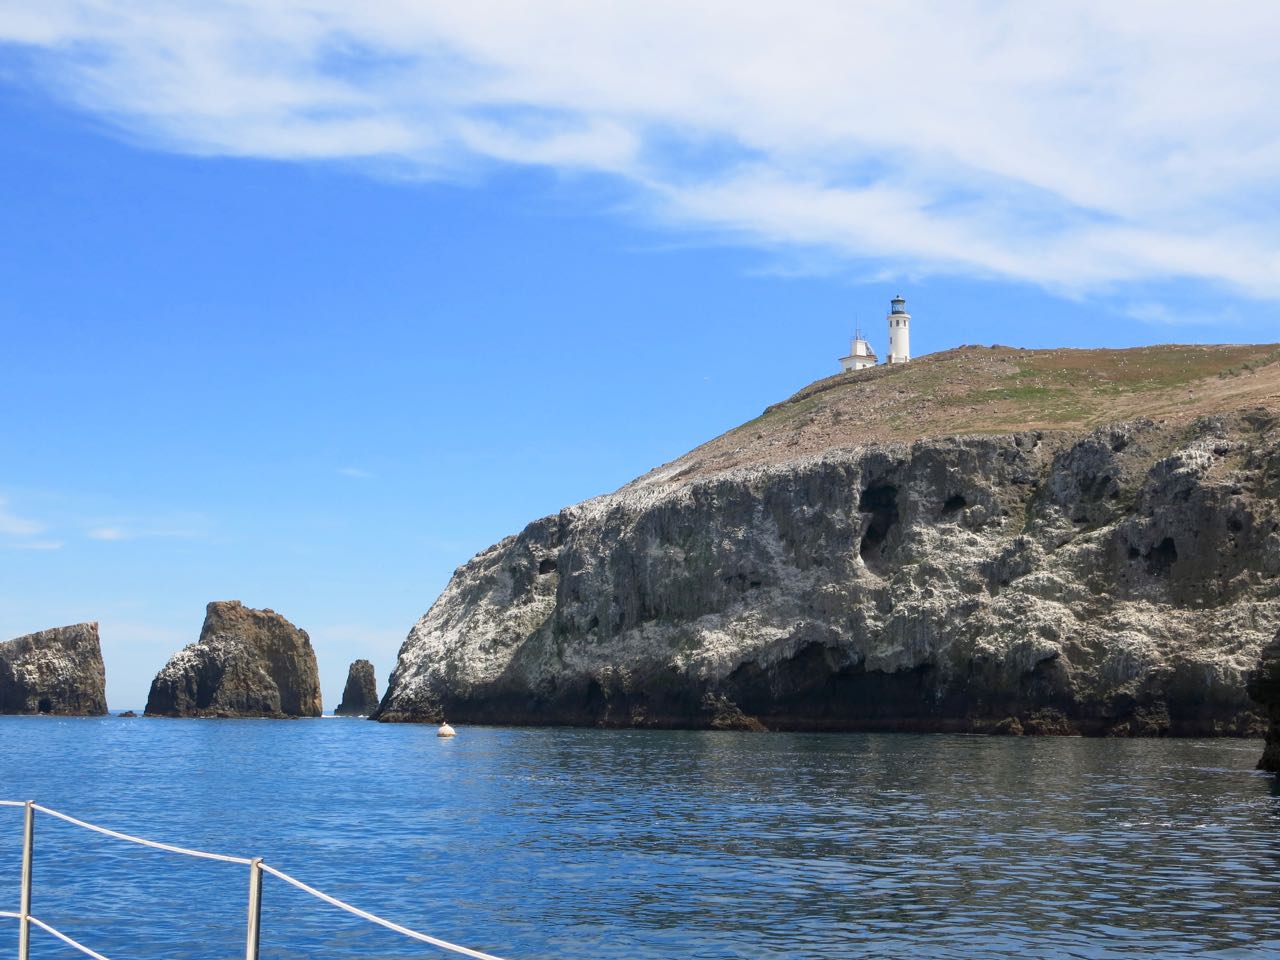 Go to Anacapa Landing Cove with Capt. Dan Ryder and Sail Channel islands.